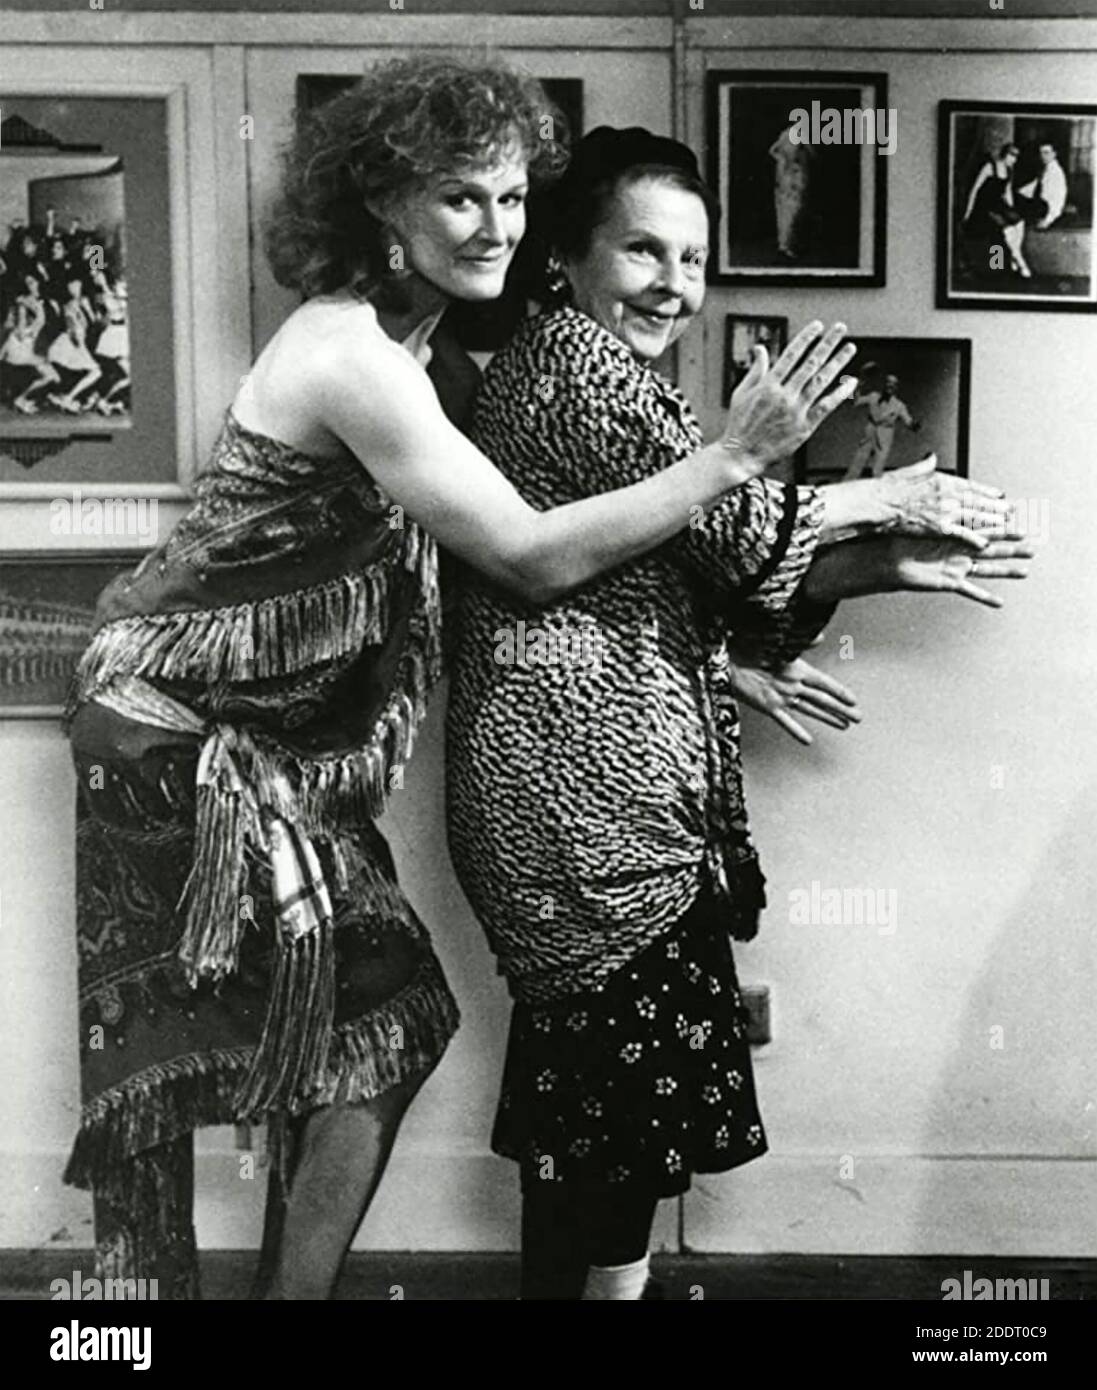 MAXIE 1985 Orion Pictures film with Glen Close at left and Ruth Gordon  Stock Photo - Alamy